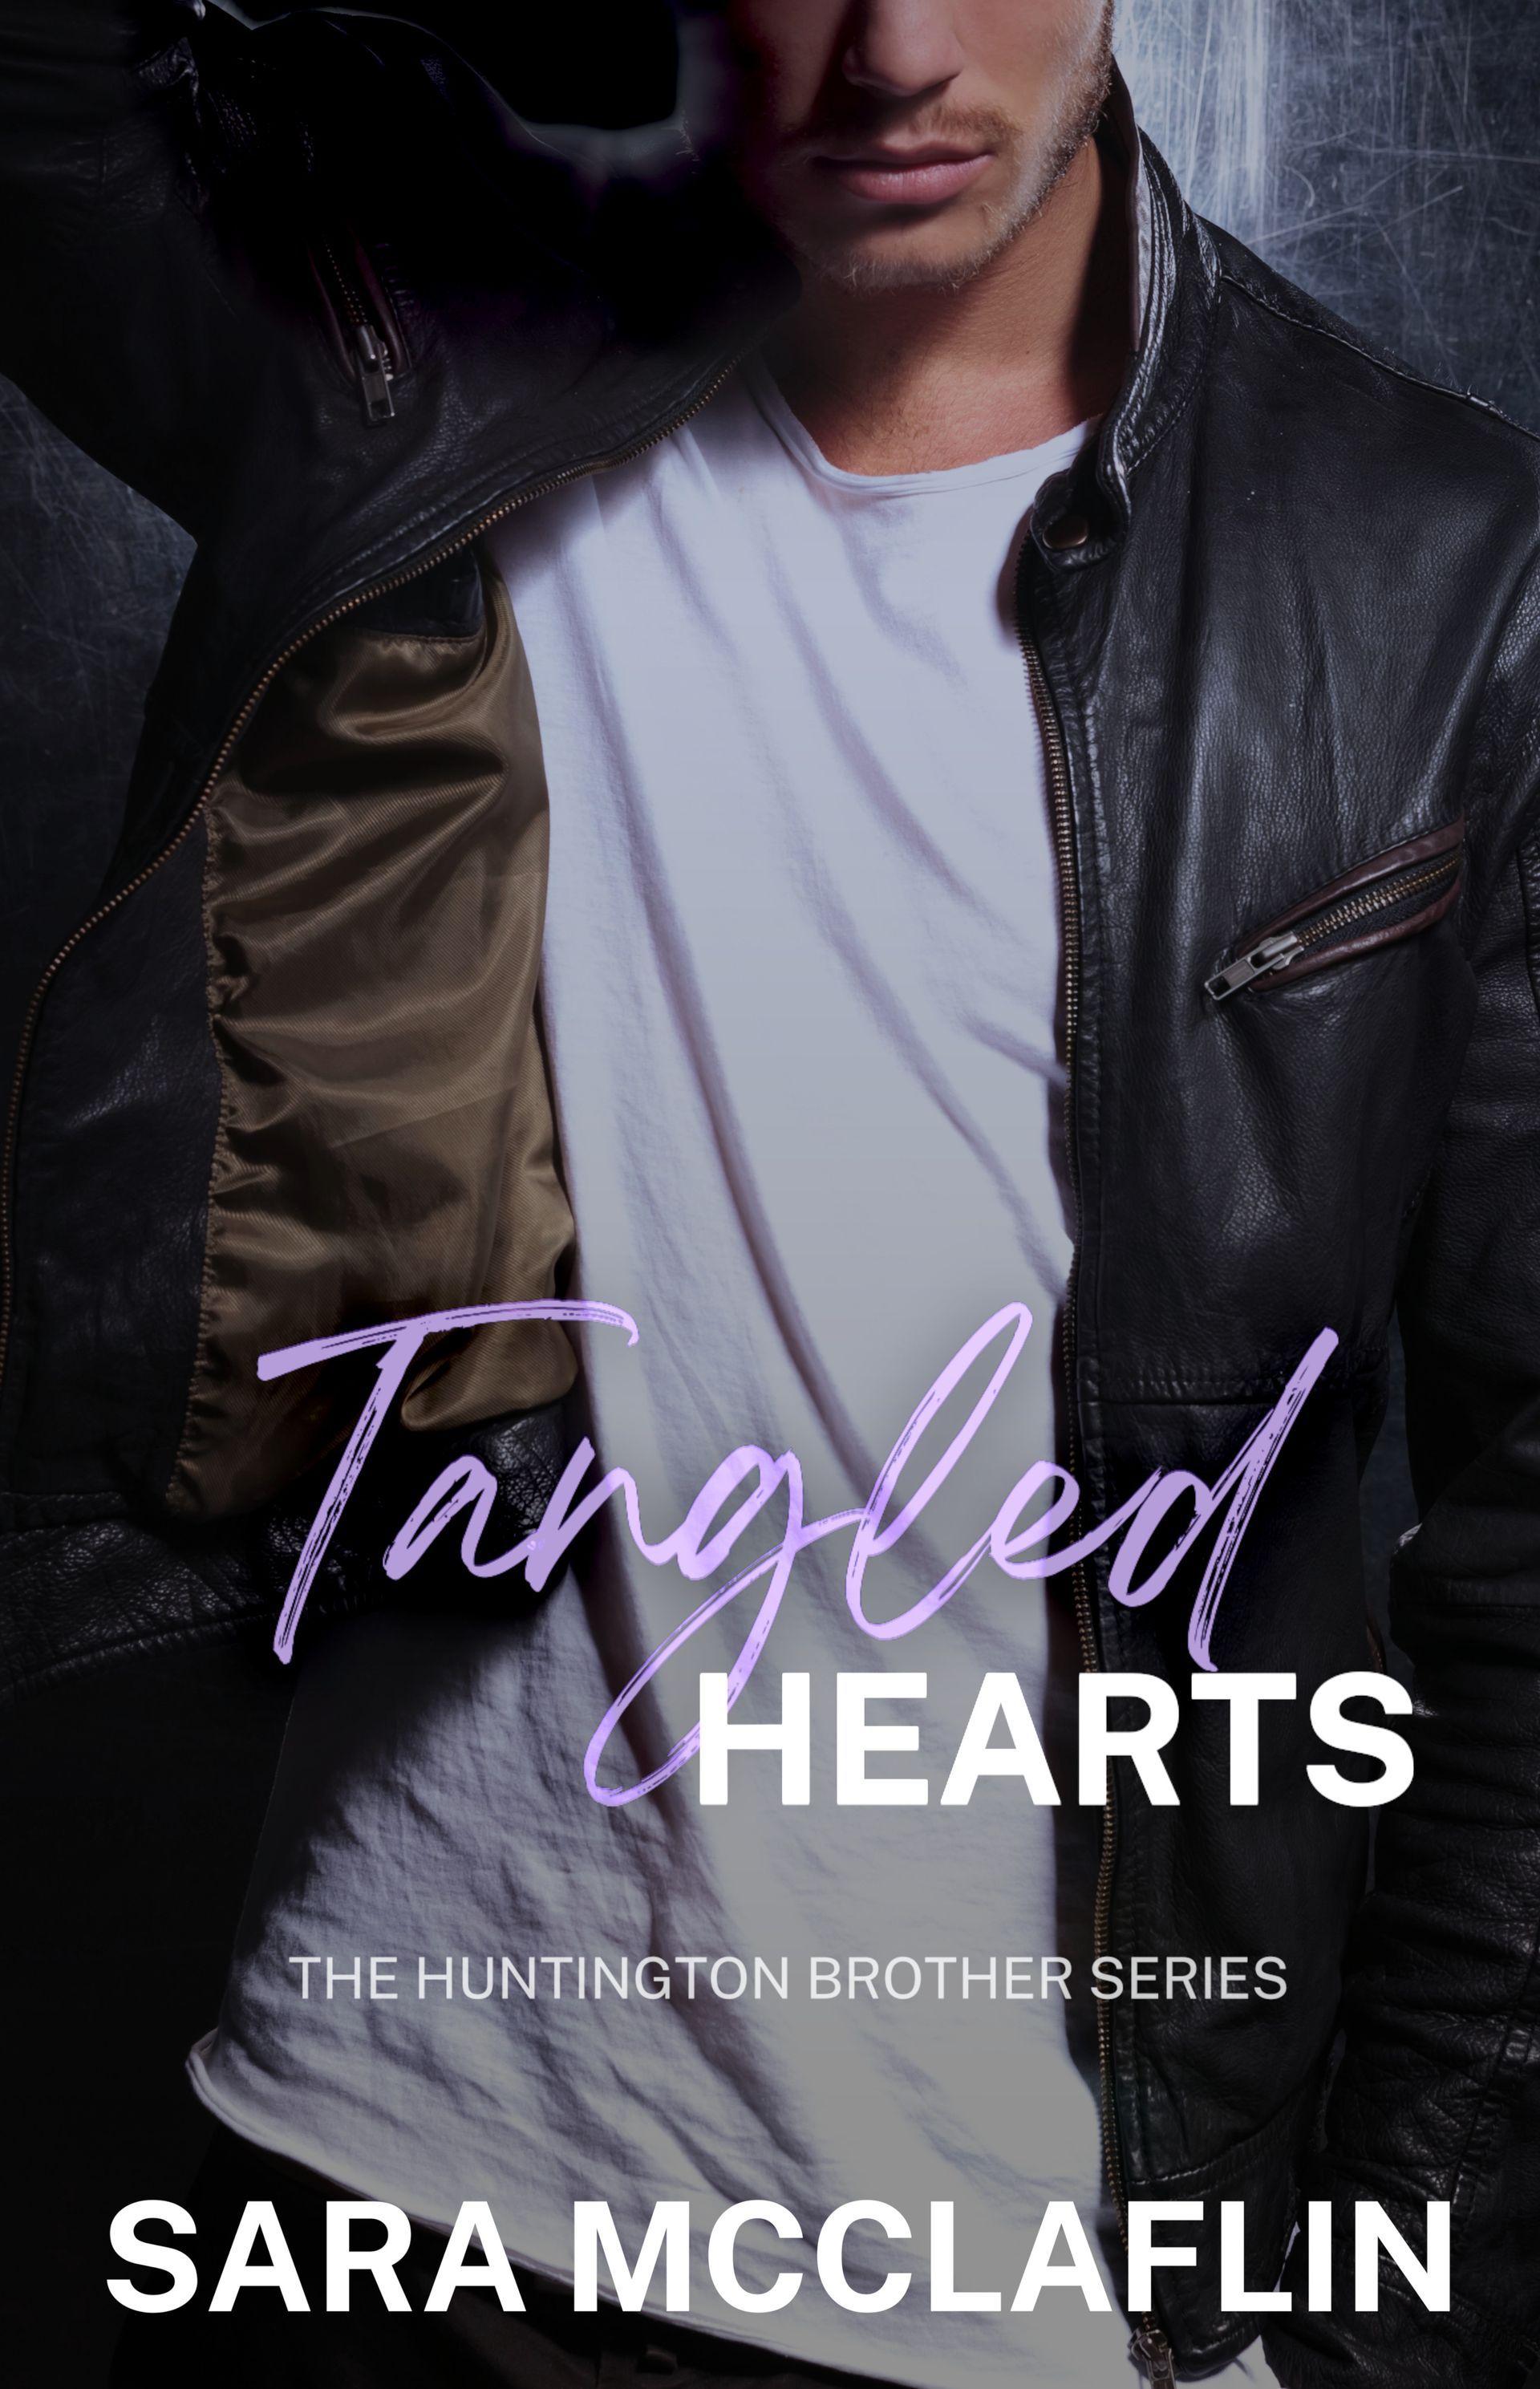 A book cover for Tangled Hearts by Sara McClaflin.